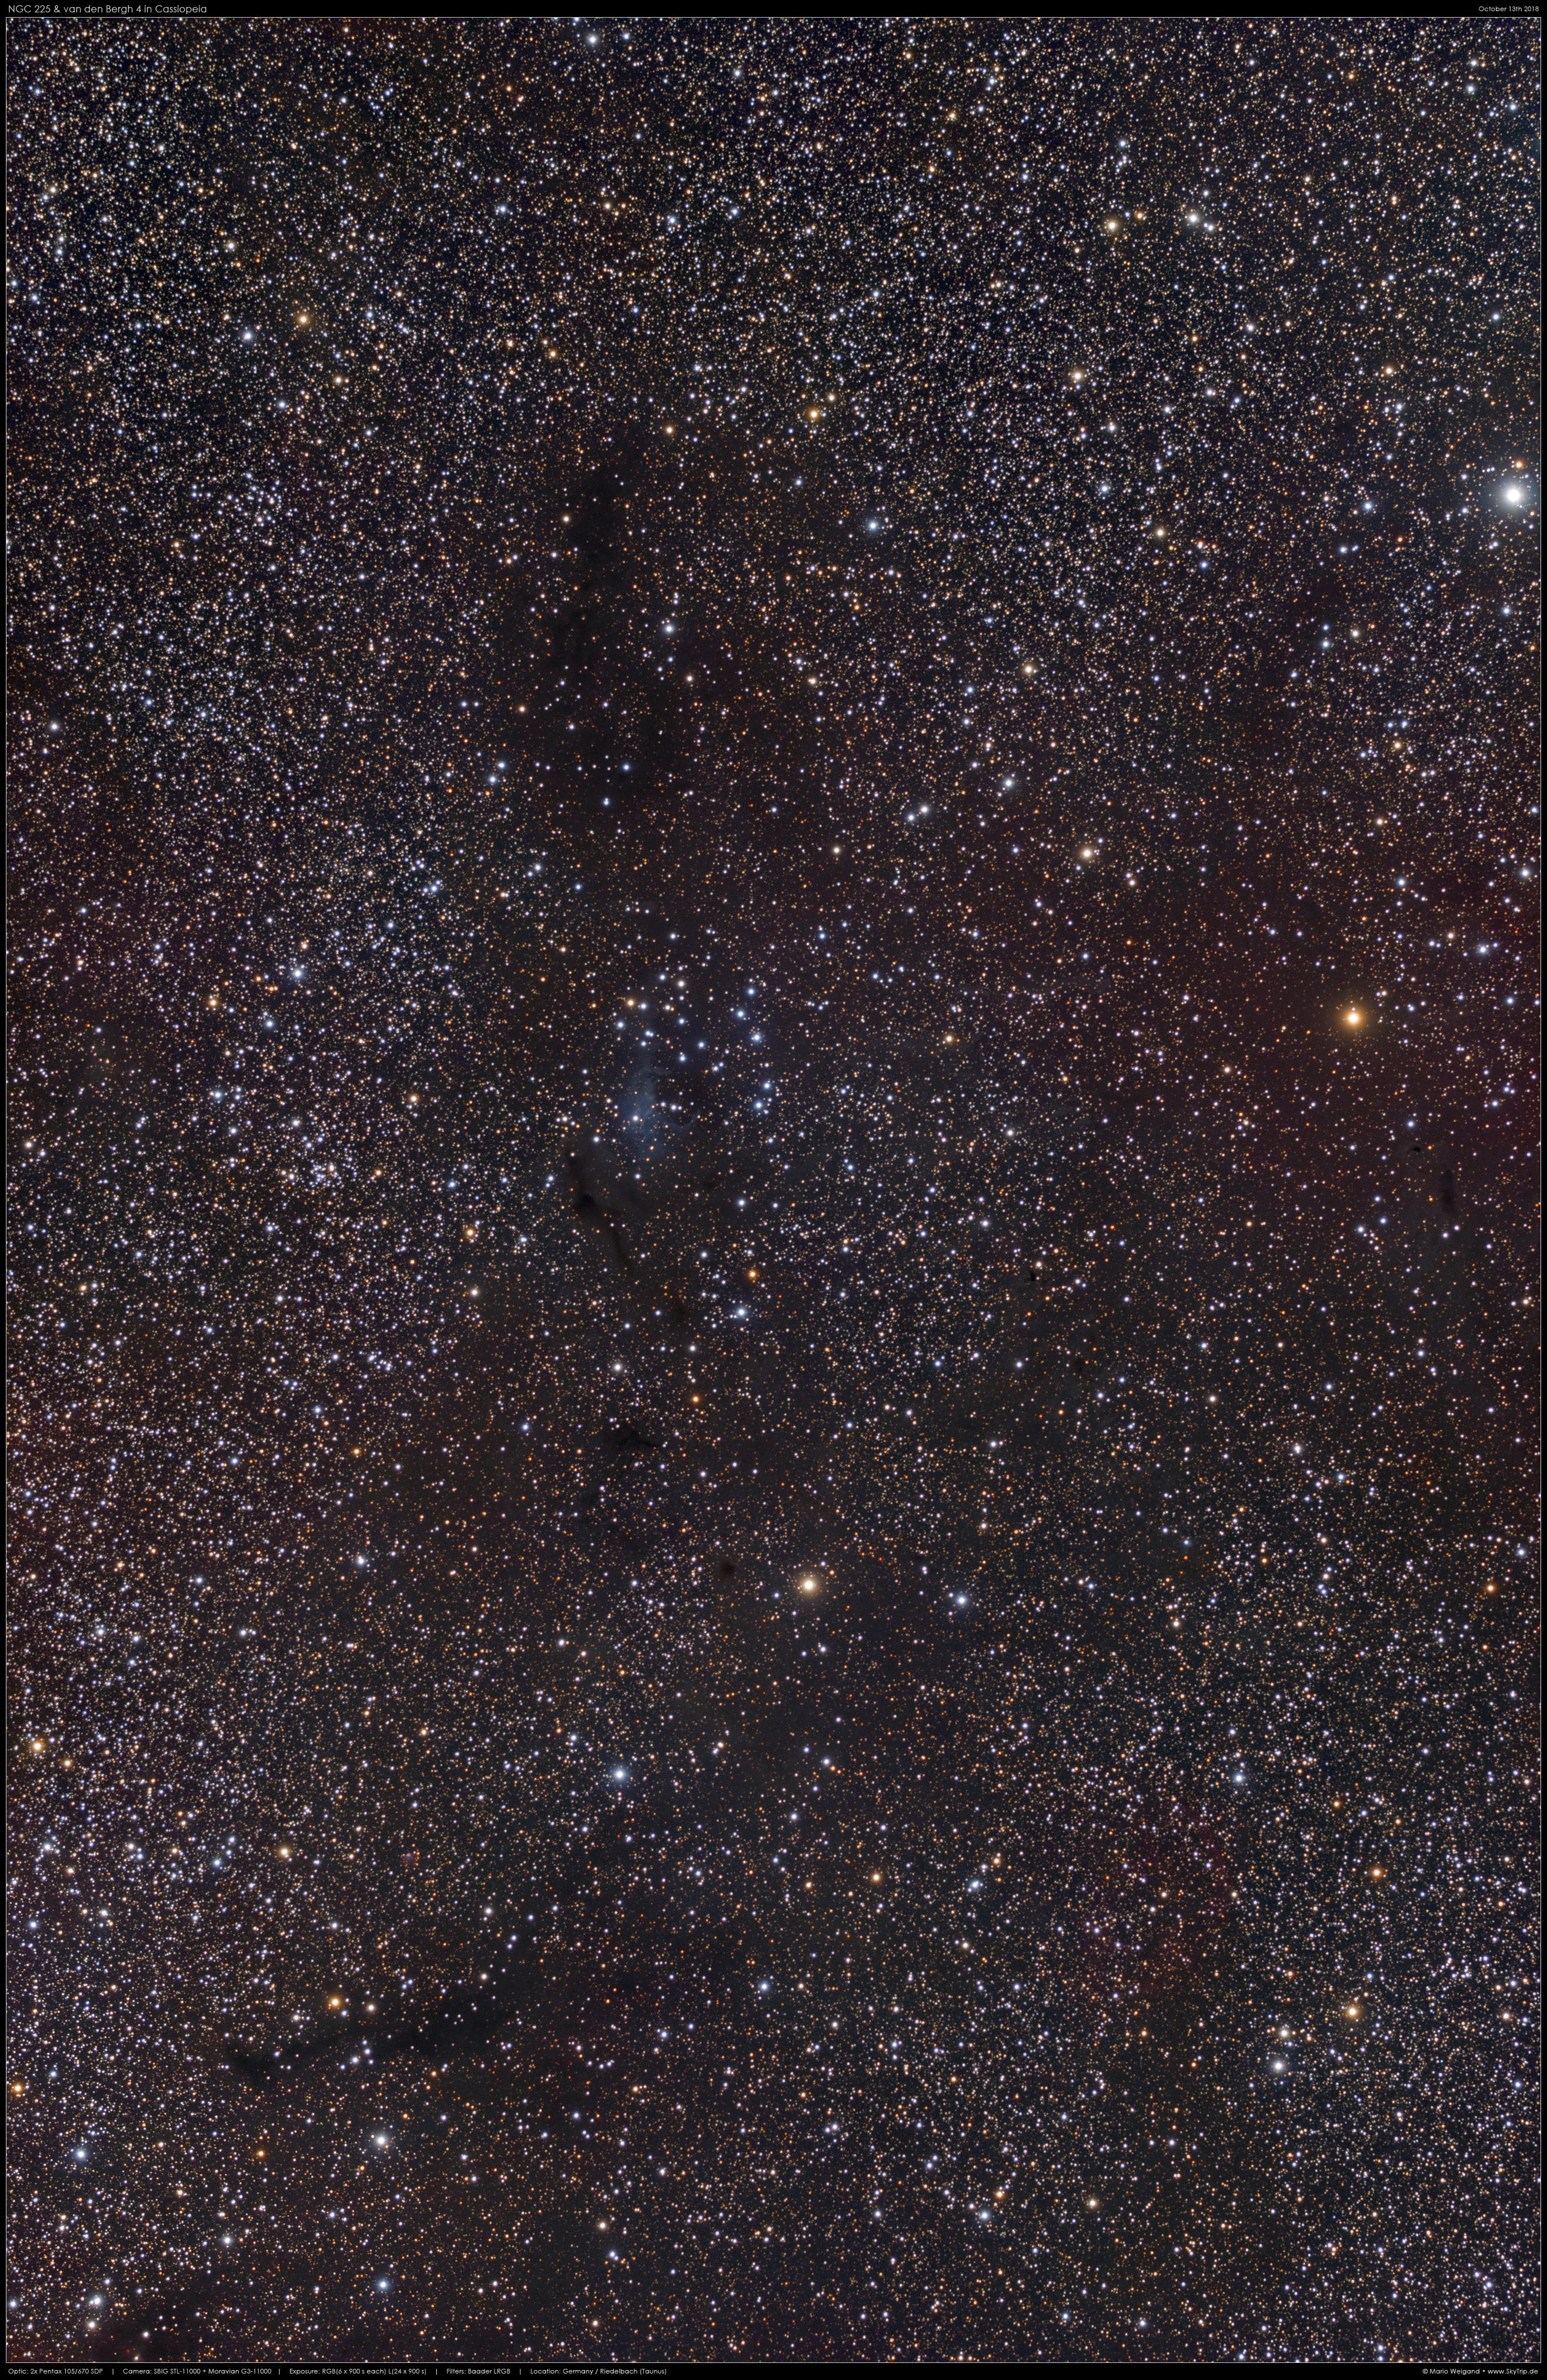 NGC 225 & vdB 4 in Cassiopeia